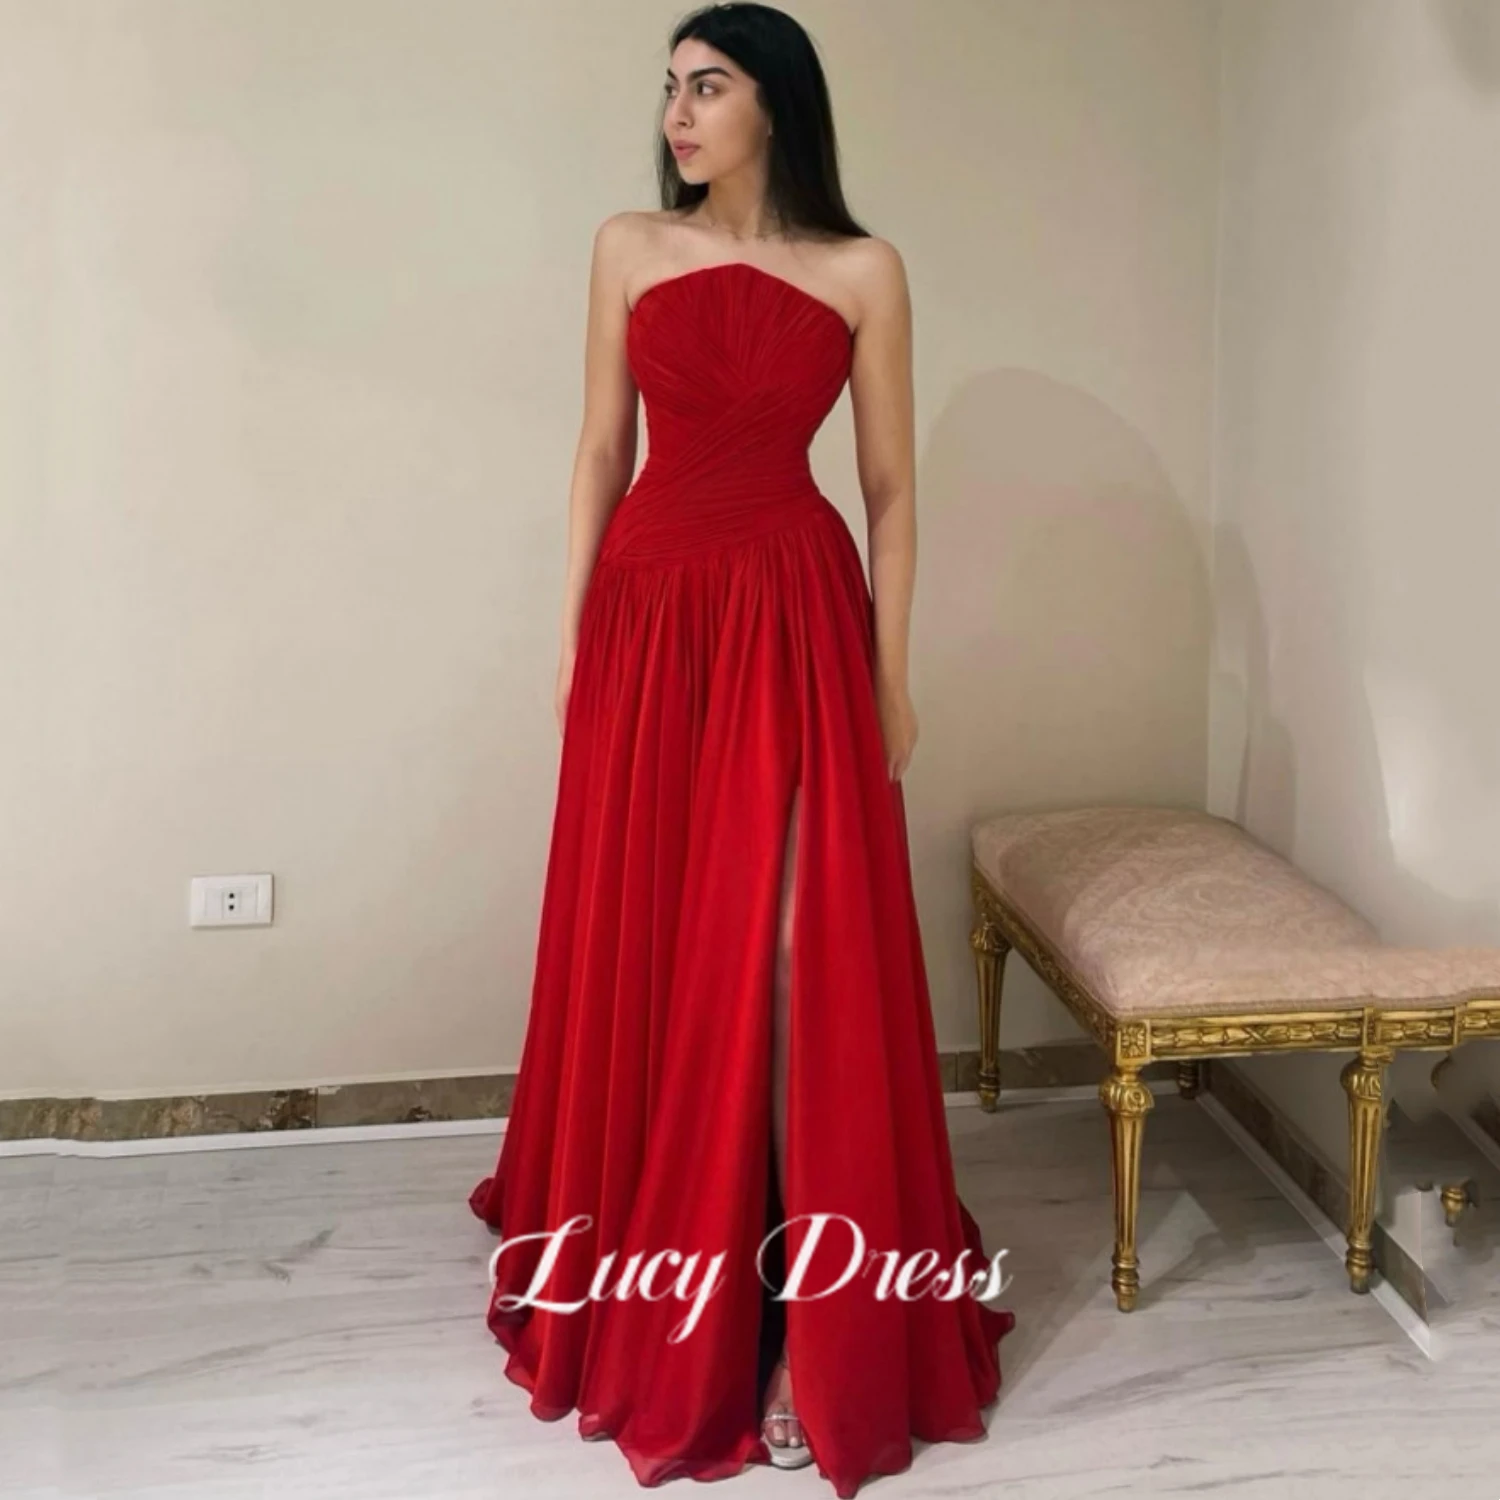 

Lucy Red Elegant Gowns Evening Dress Slit Party Dresses for Special Events Bridesmaid Chiffon Graduate Strapless Reunion Prom